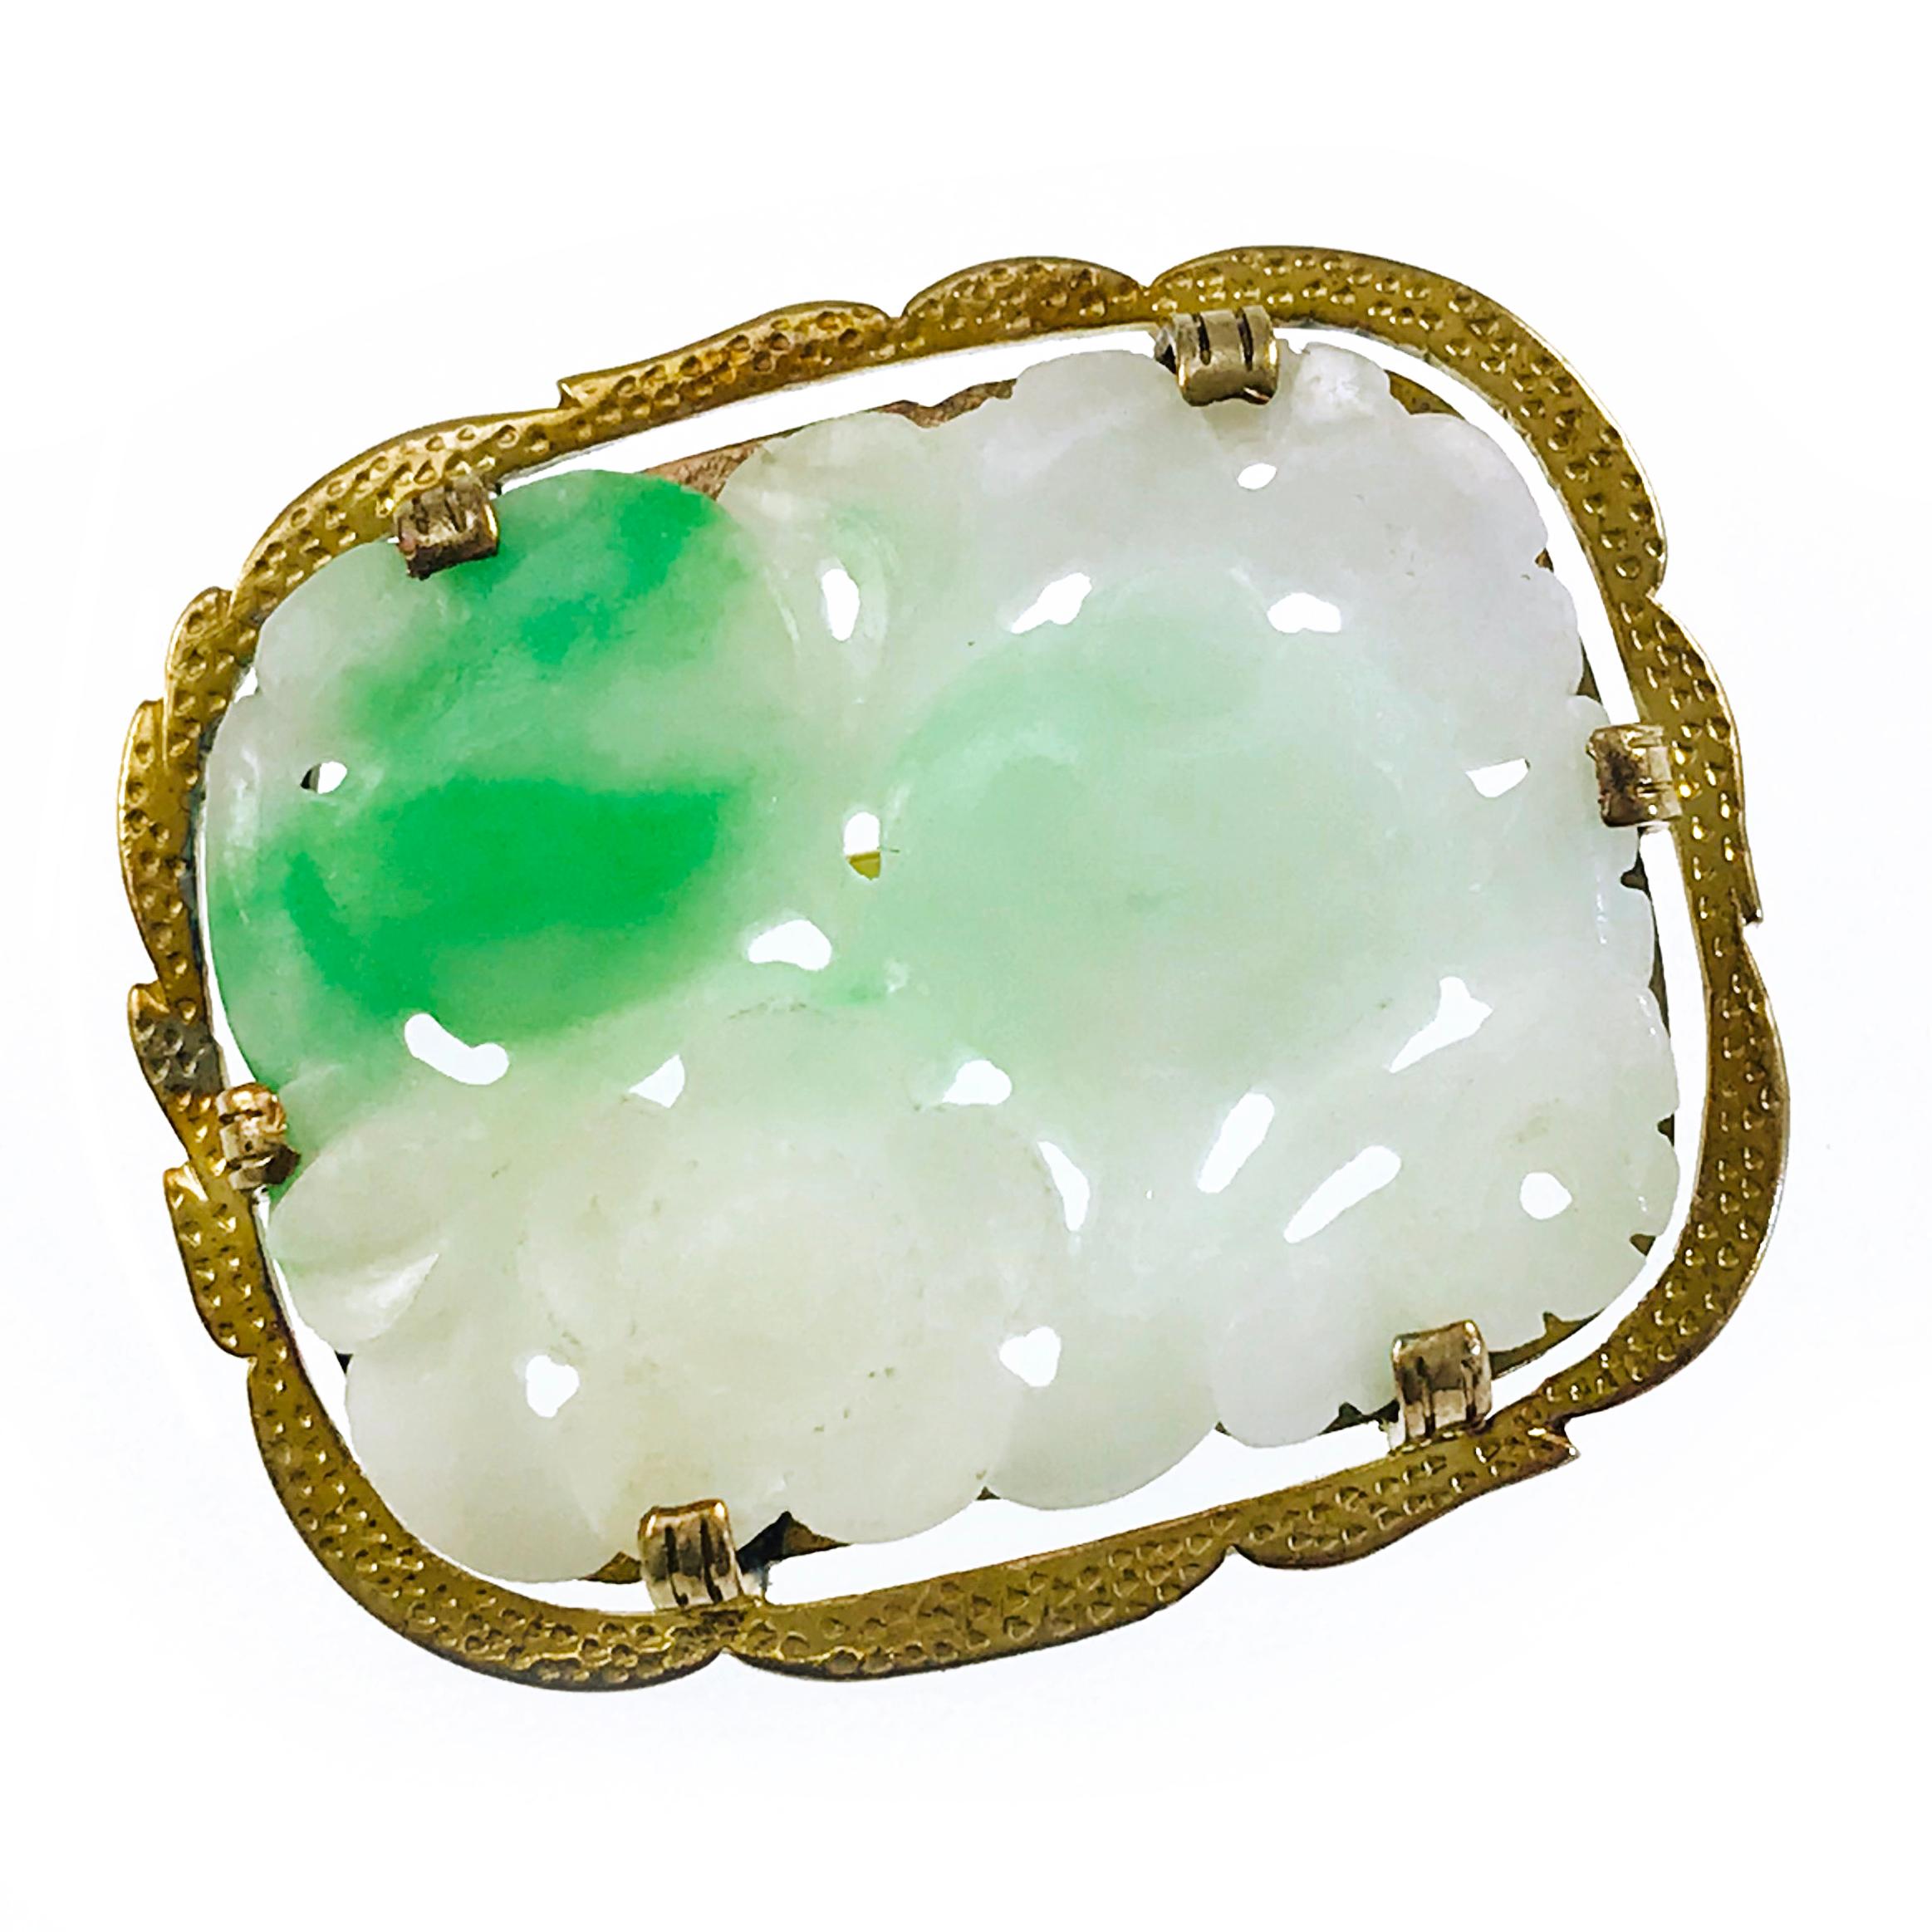 Vermeil Carved Moss-in-Snow Jade Brooch/Pin. The Jade is bright green on the top left side and the rest of the jade is white with hints of green, hence moss-in-snow jade. The motif is flowers and leaves with the surrounding silver in a dimpled